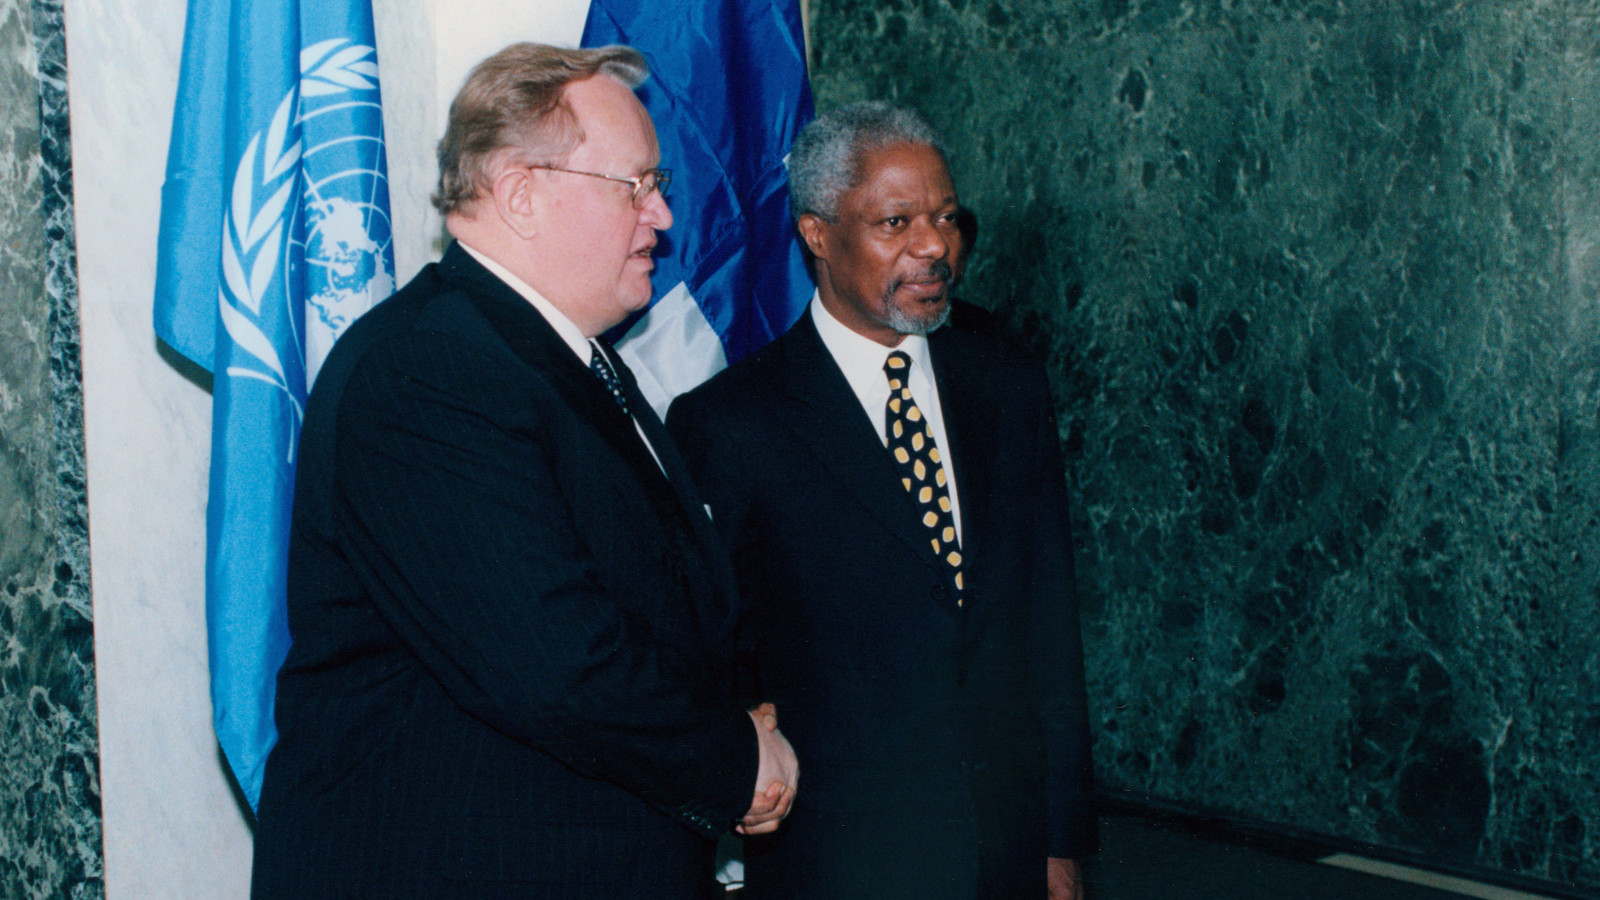 Ahtisaari and Kofi Annan shaking hands in front of flags of UN and Finland.